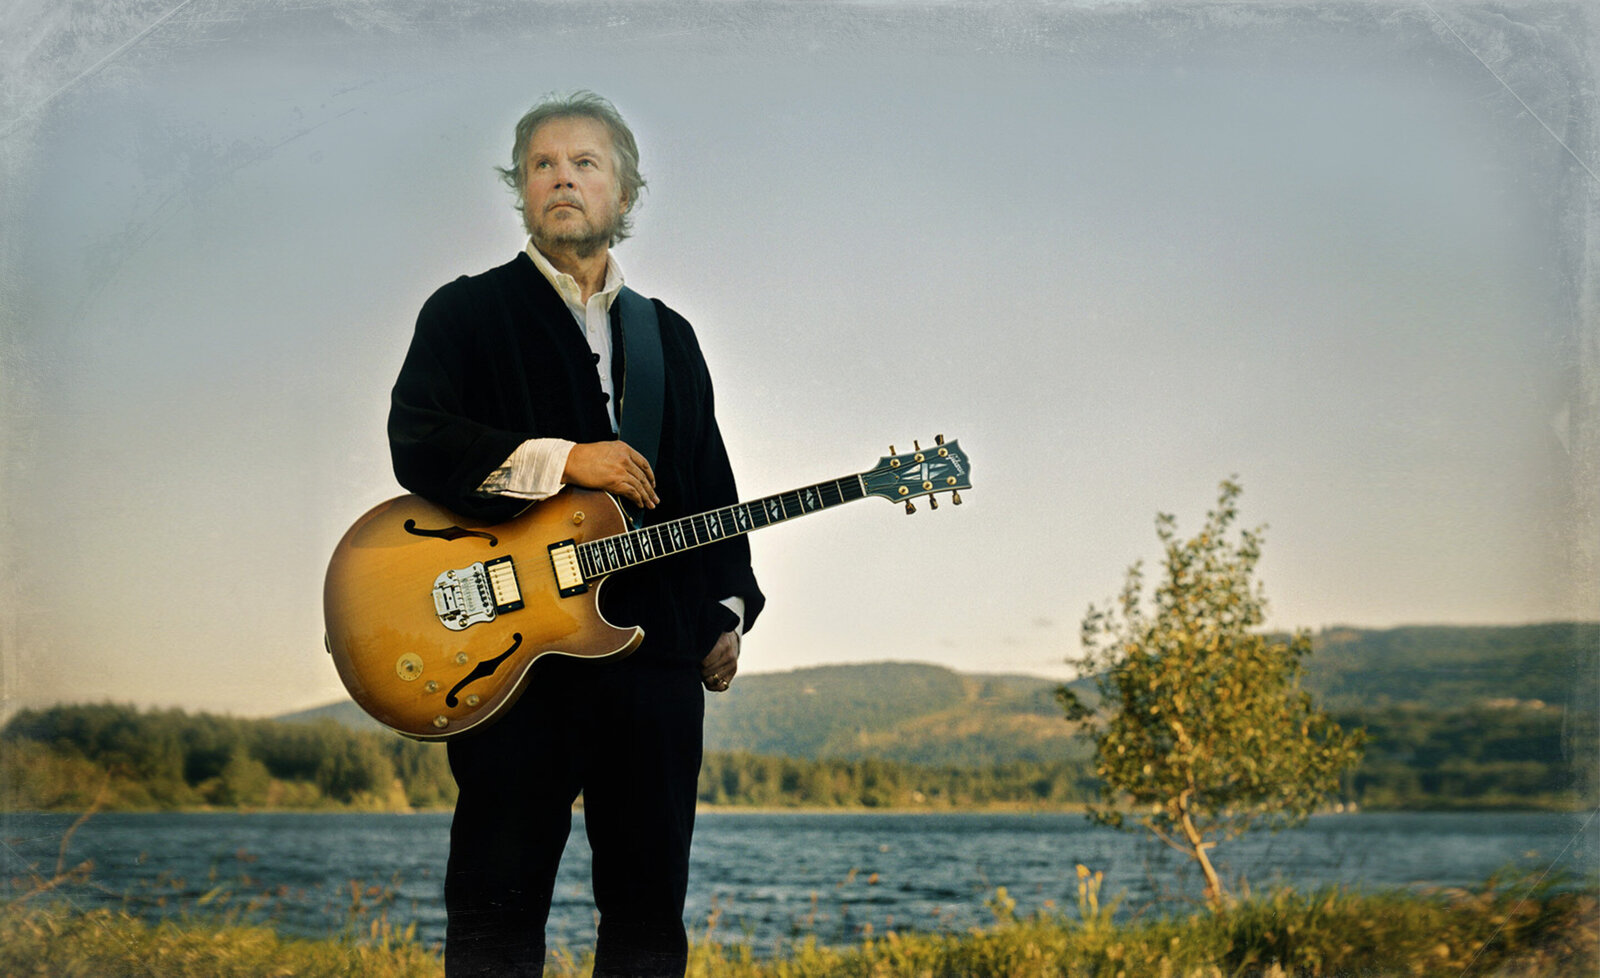 Randy Bachman portrait standing with guitar wearing black suit lake and small tree behind